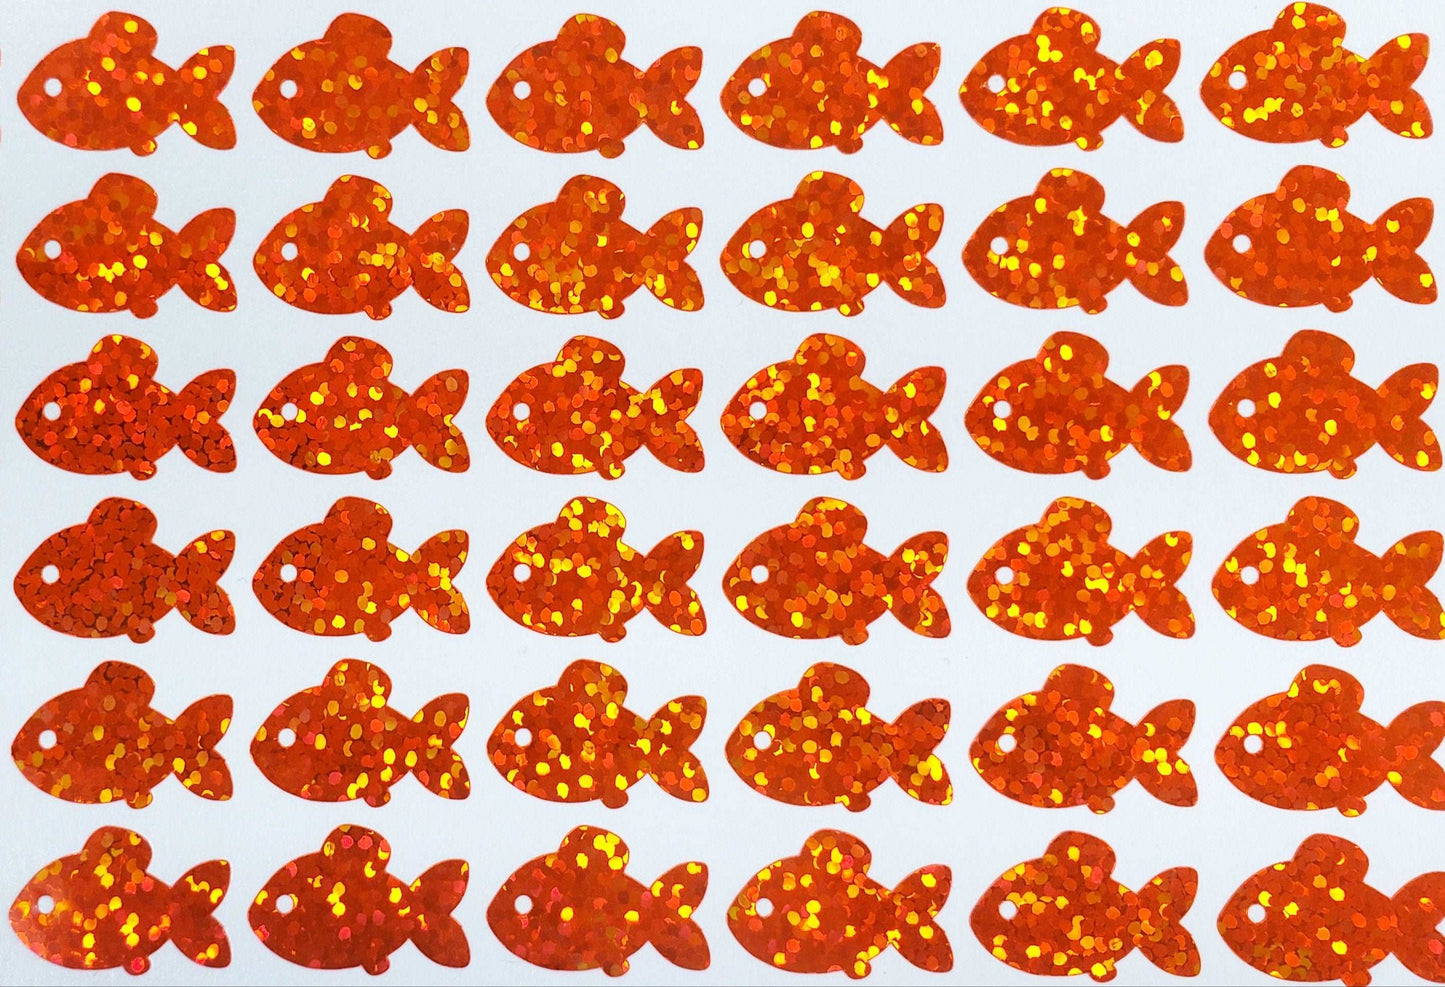 Goldfish Stickers, set of 100 or 250 orange fish glitter decals, small fish stickers for calendars, notebooks, laptops, journals and crafts